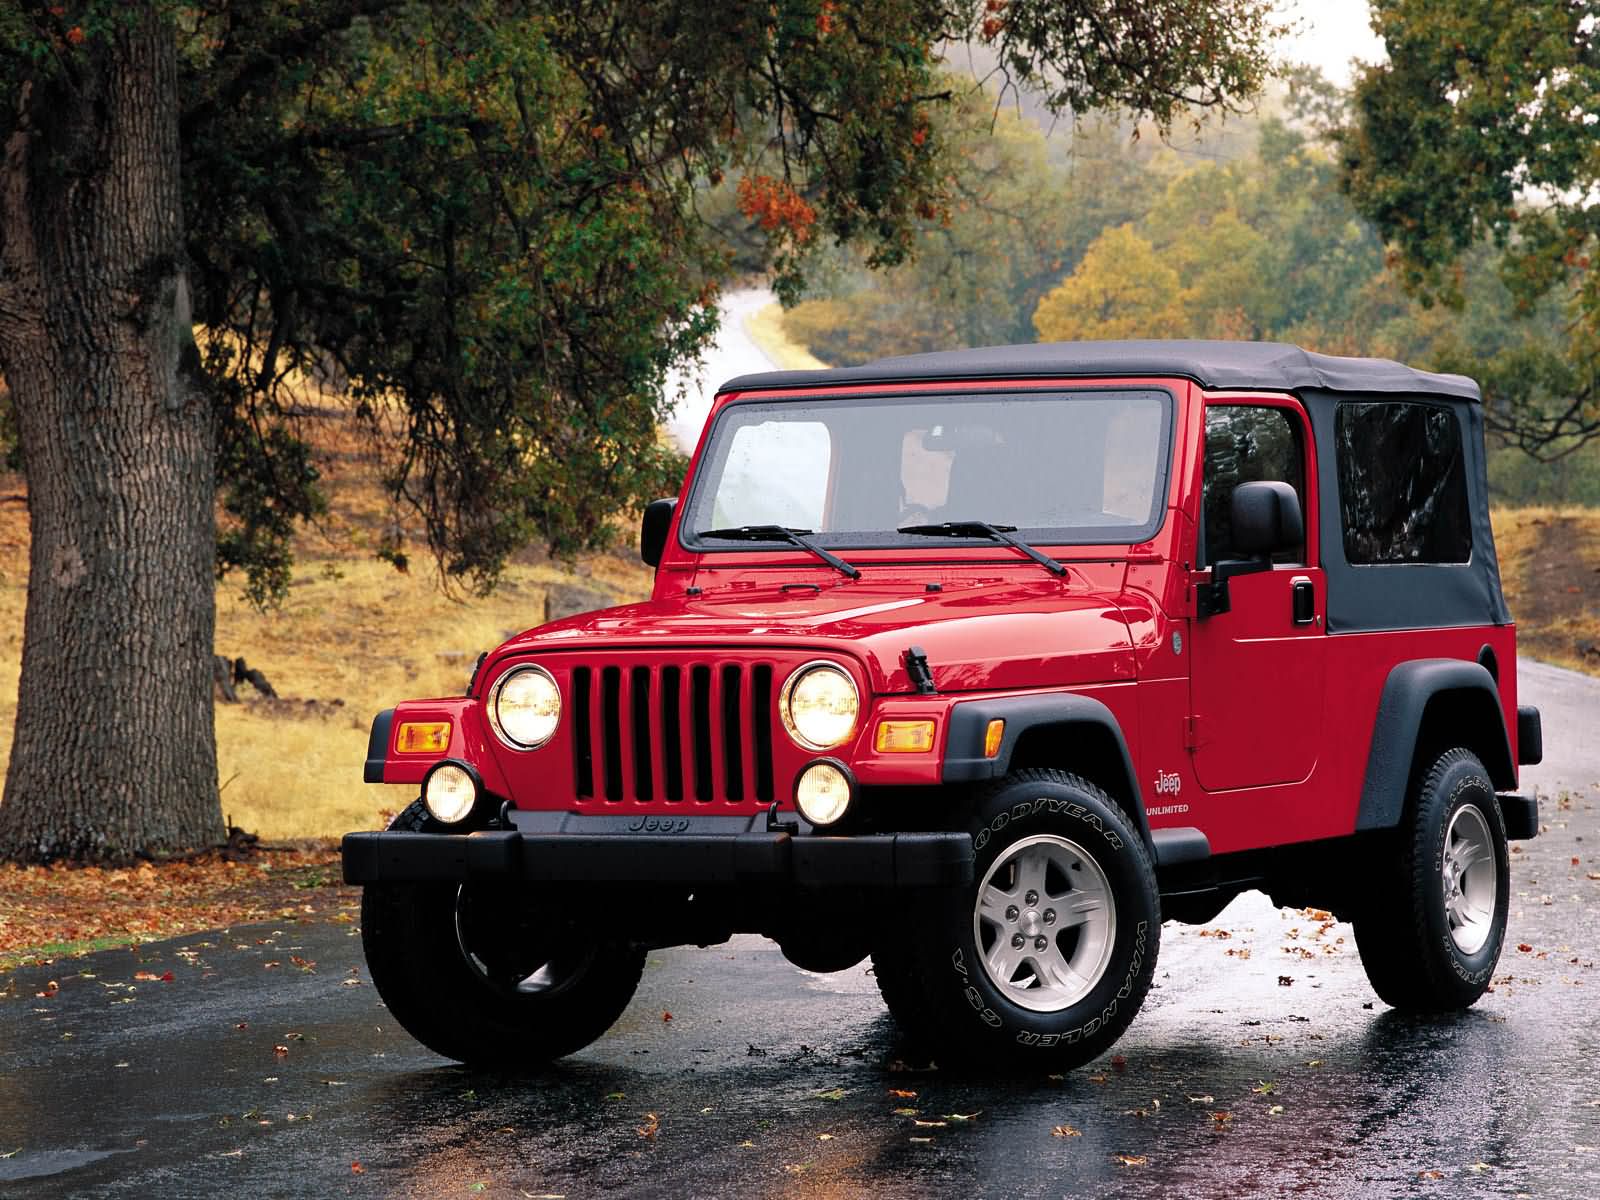 Jeep Wrangler picture. Jeep photo gallery